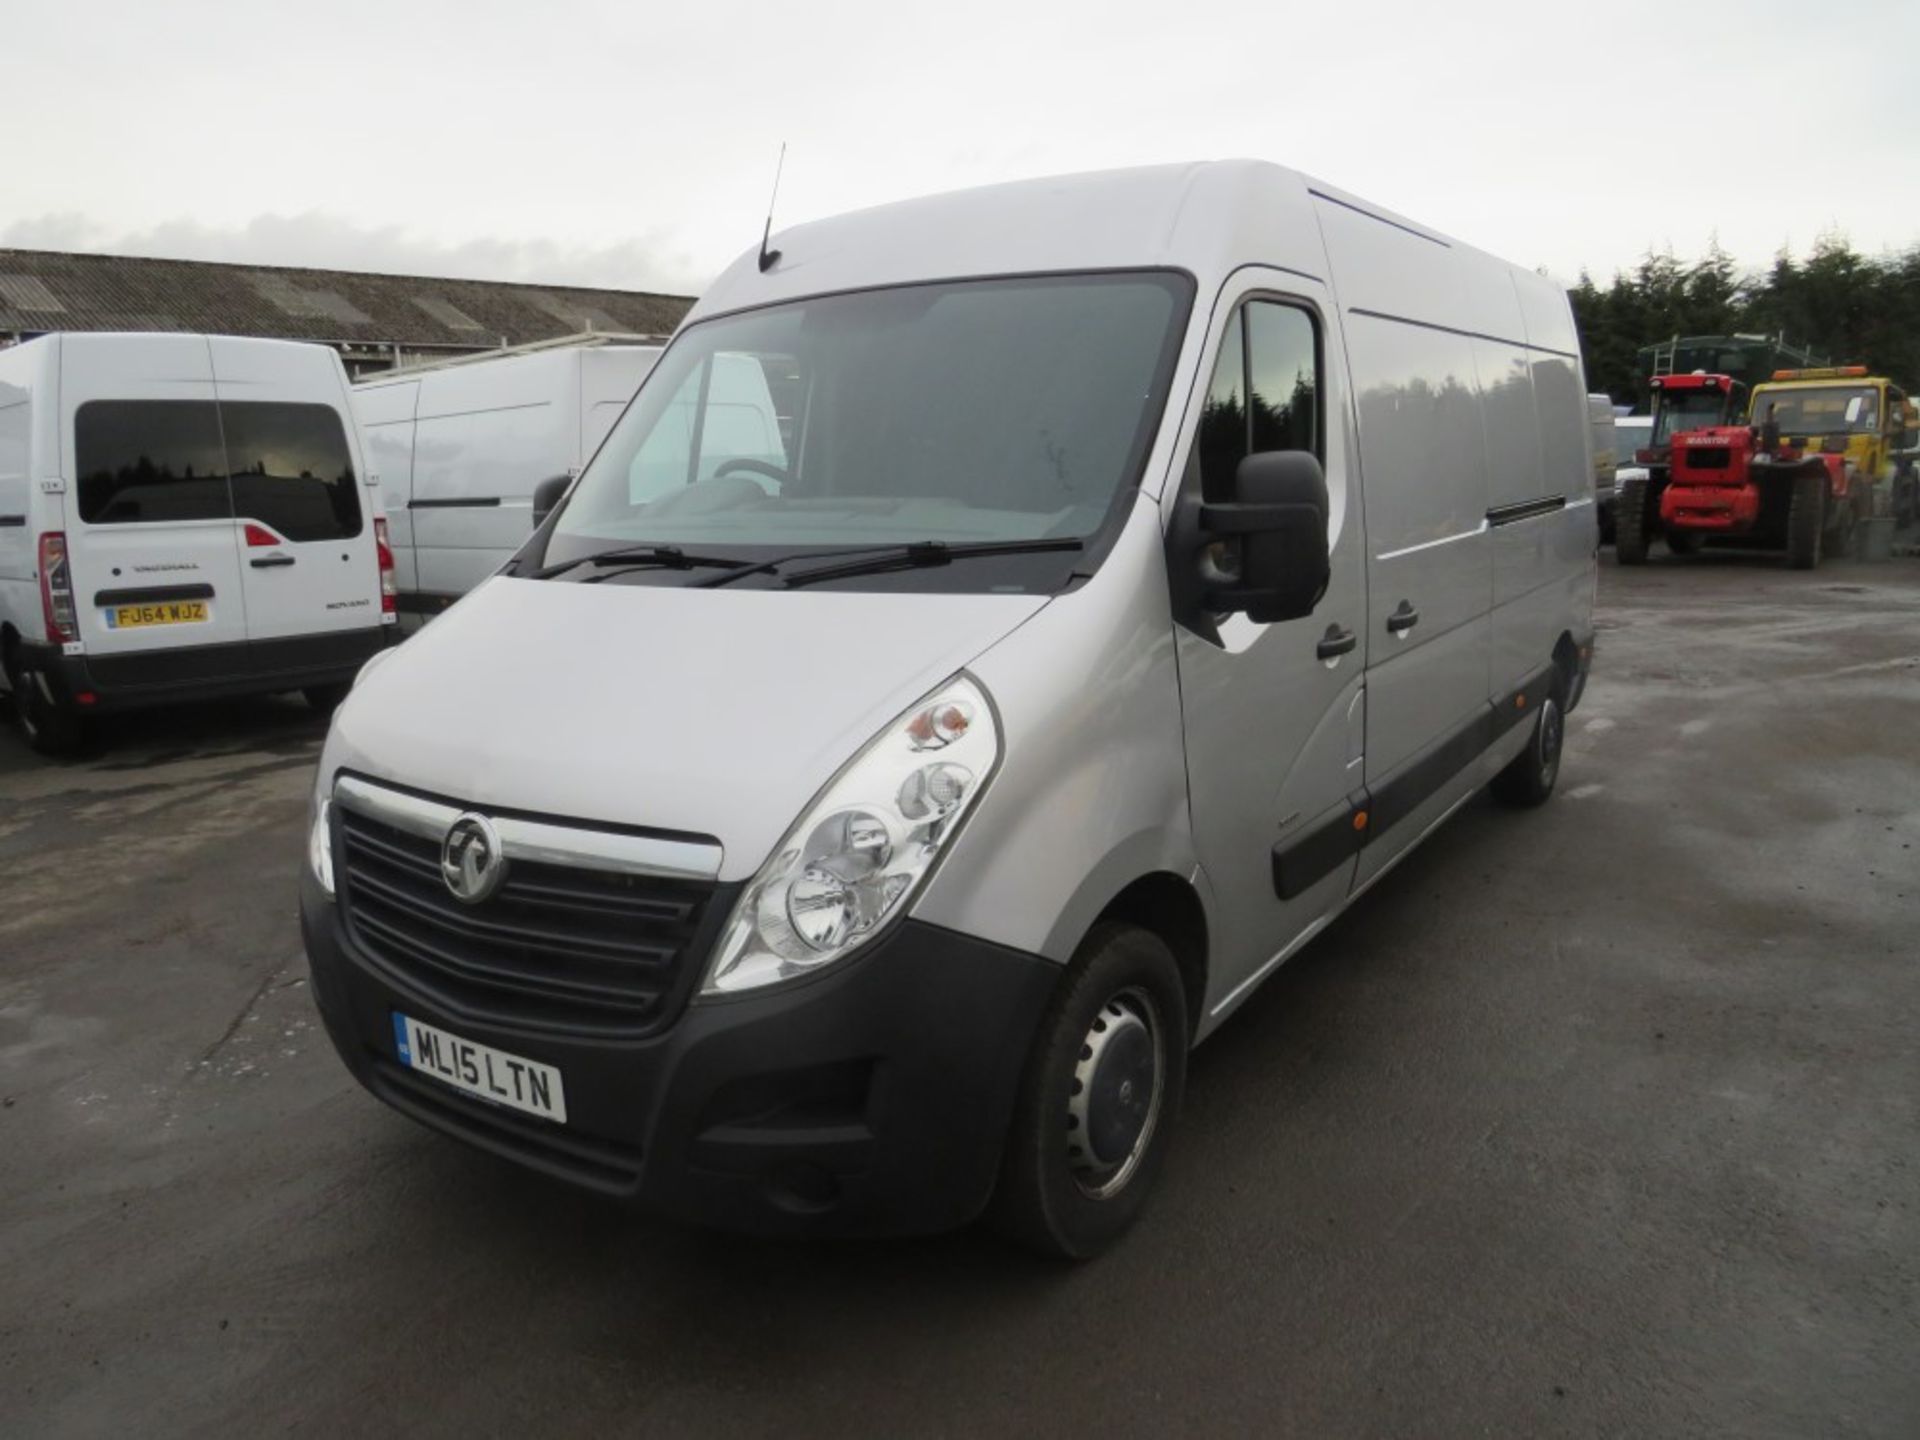 15 reg VAUXHALL MOVANO F3500 CDTI, 1ST REG 05/15, TEST 05/20, 106558M WARRANTED, V5 HERE, 1 OWNER - Image 2 of 6